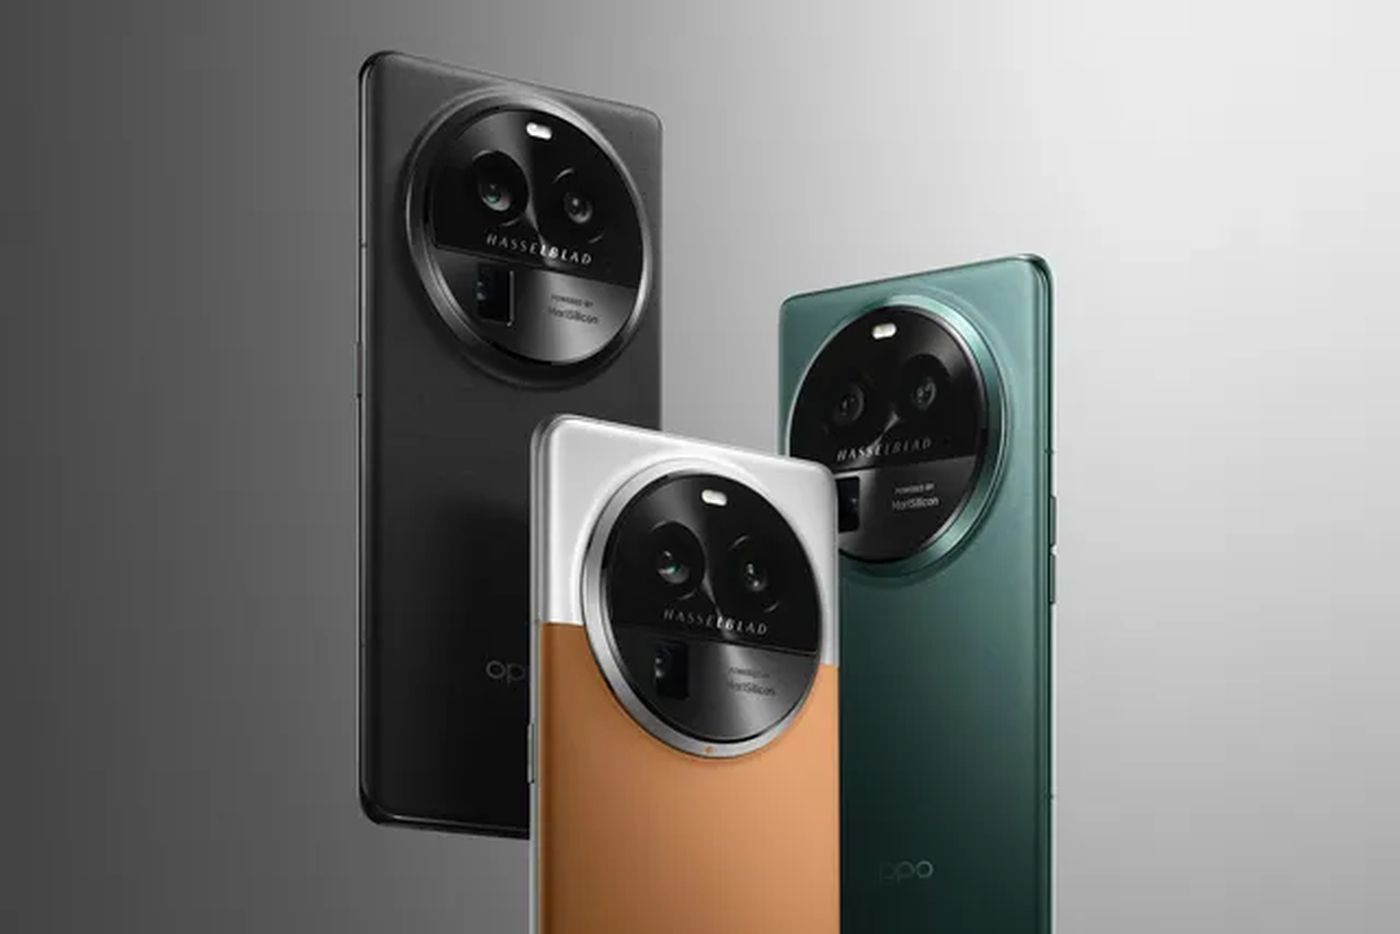 Finally, Oppo would not leave the European market despite its estrangement with Nokia